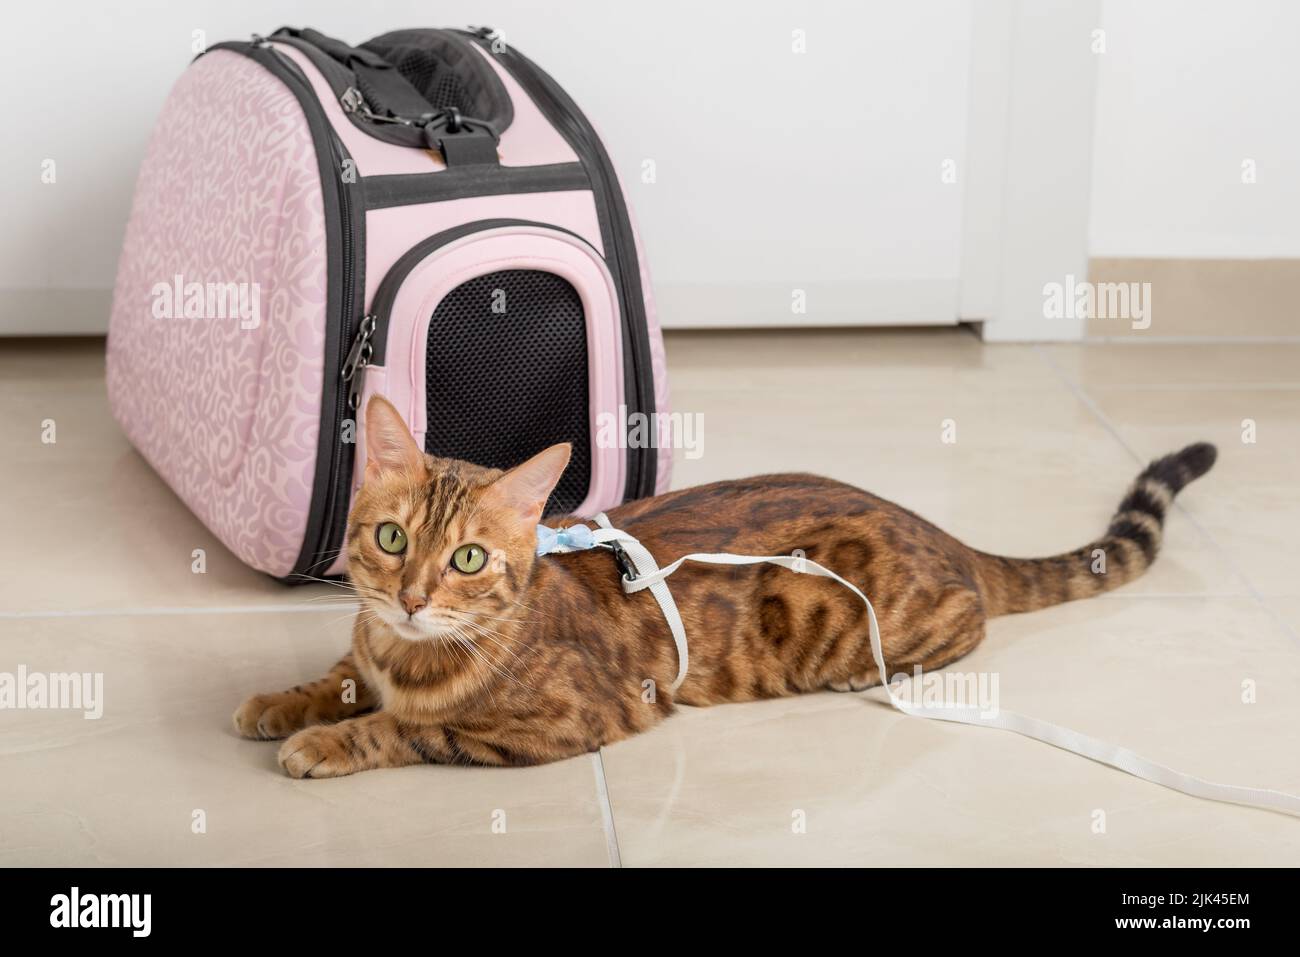 Bengal cat on a leash next to a carrying bag, waiting for a walk. Stock Photo